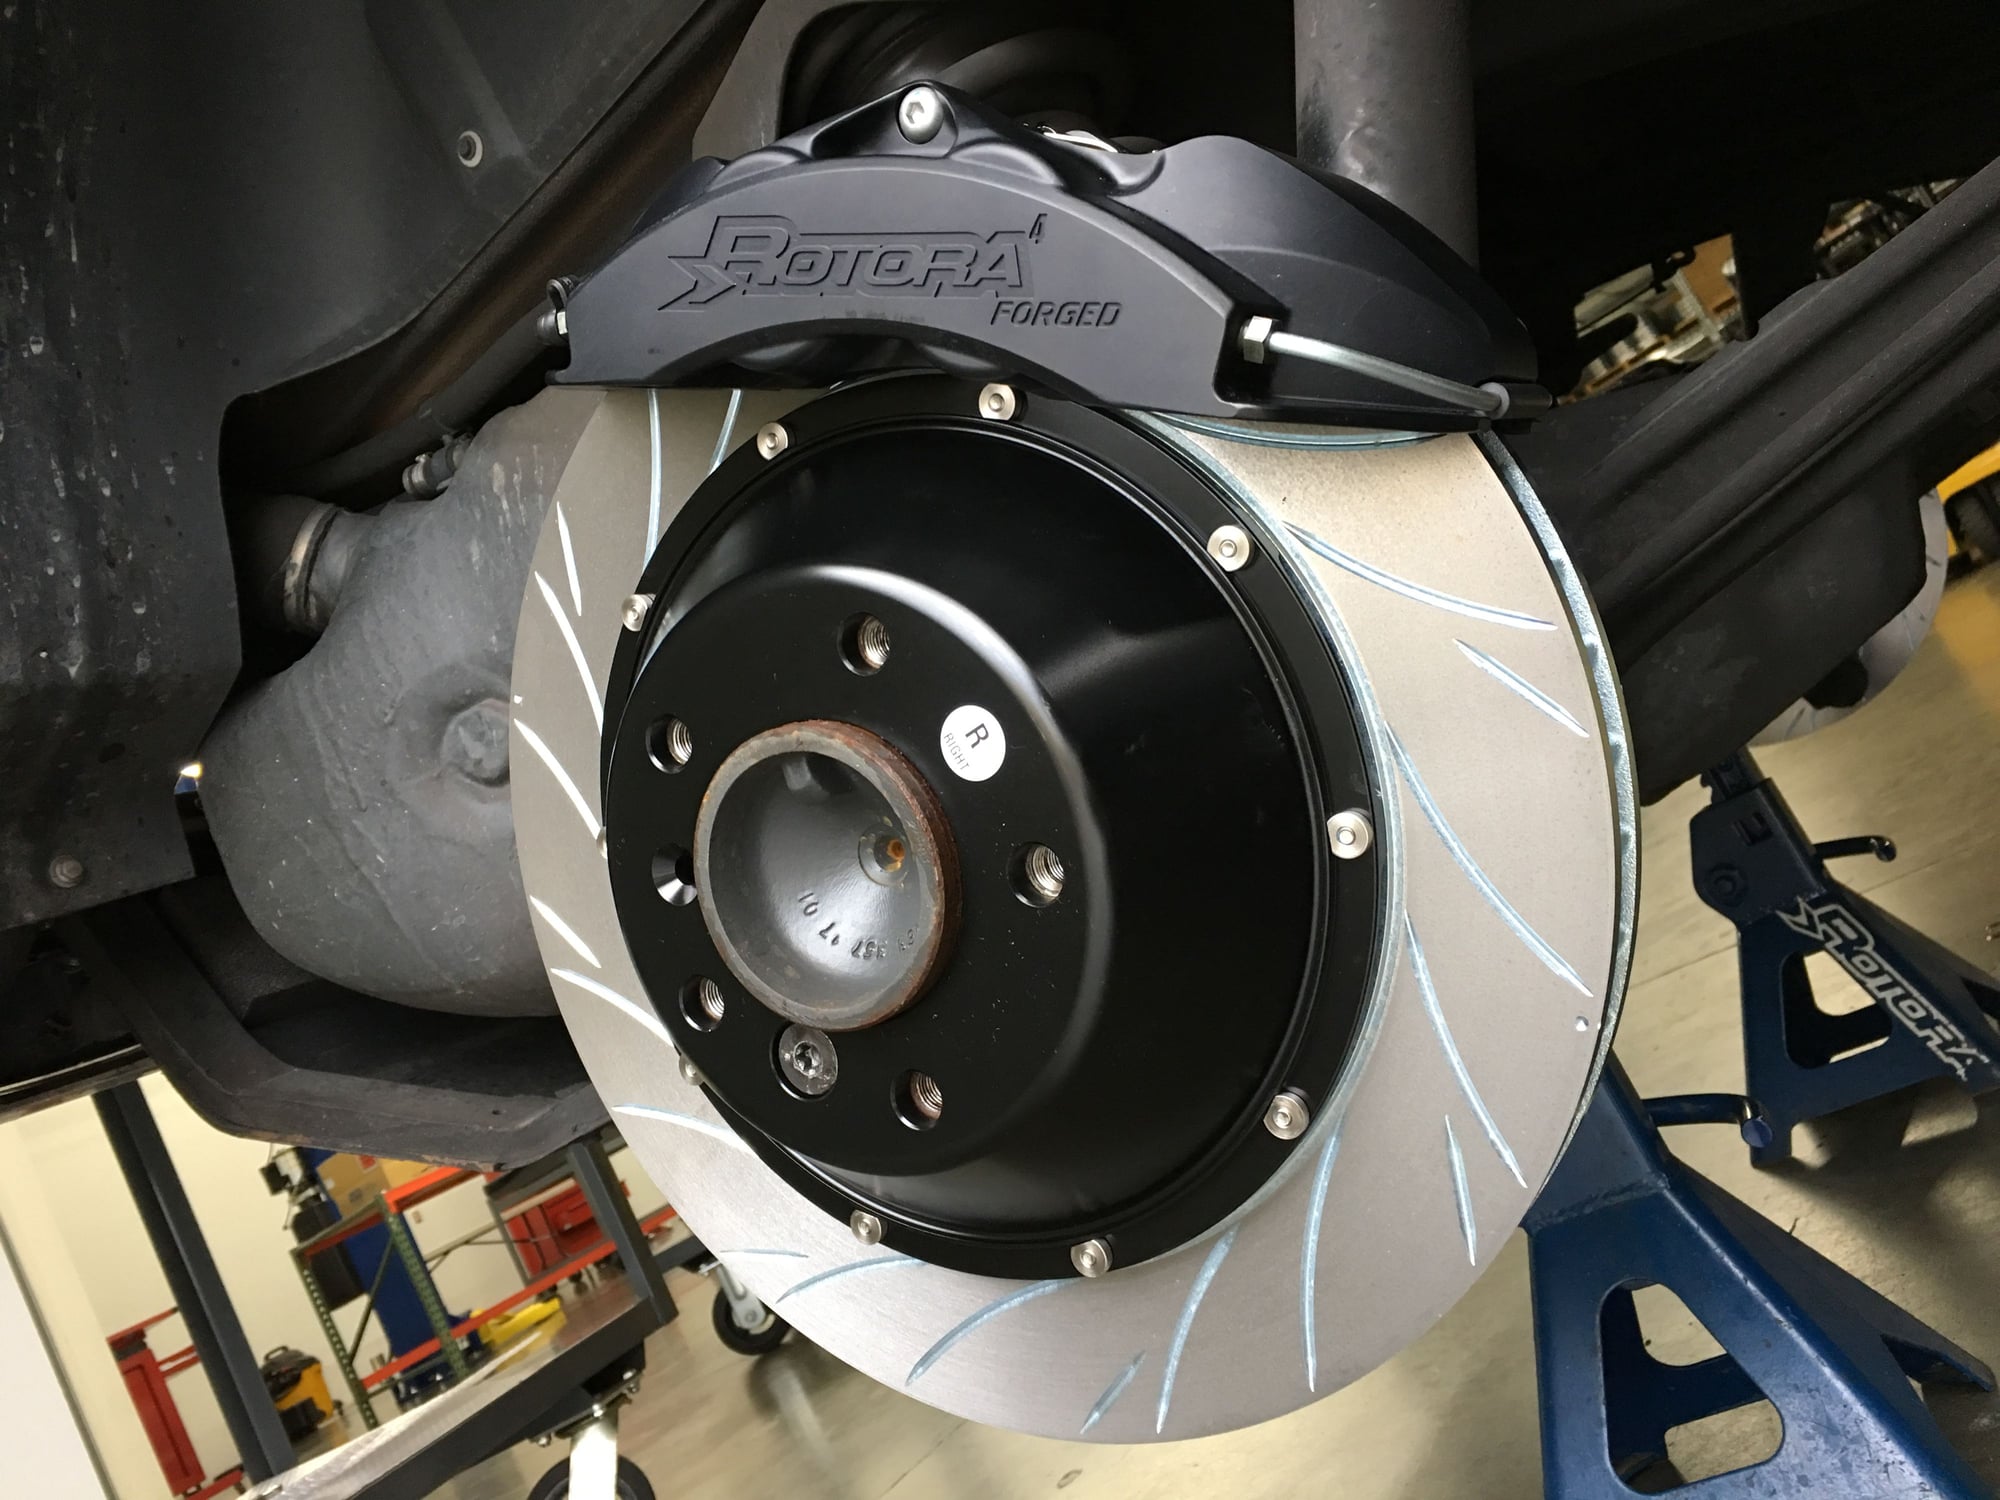 Brakes - FS: Rotora W463 16"/15" Rotor 8/4 Piston Brake System - Used - All Years Mercedes-Benz G550 - All Years Mercedes-Benz G500 - All Years Mercedes-Benz G63 AMG - All Years Mercedes-Benz G65 AMG - 2012 Mercedes-Benz G550 - Palo Alto, CA 94306, United States